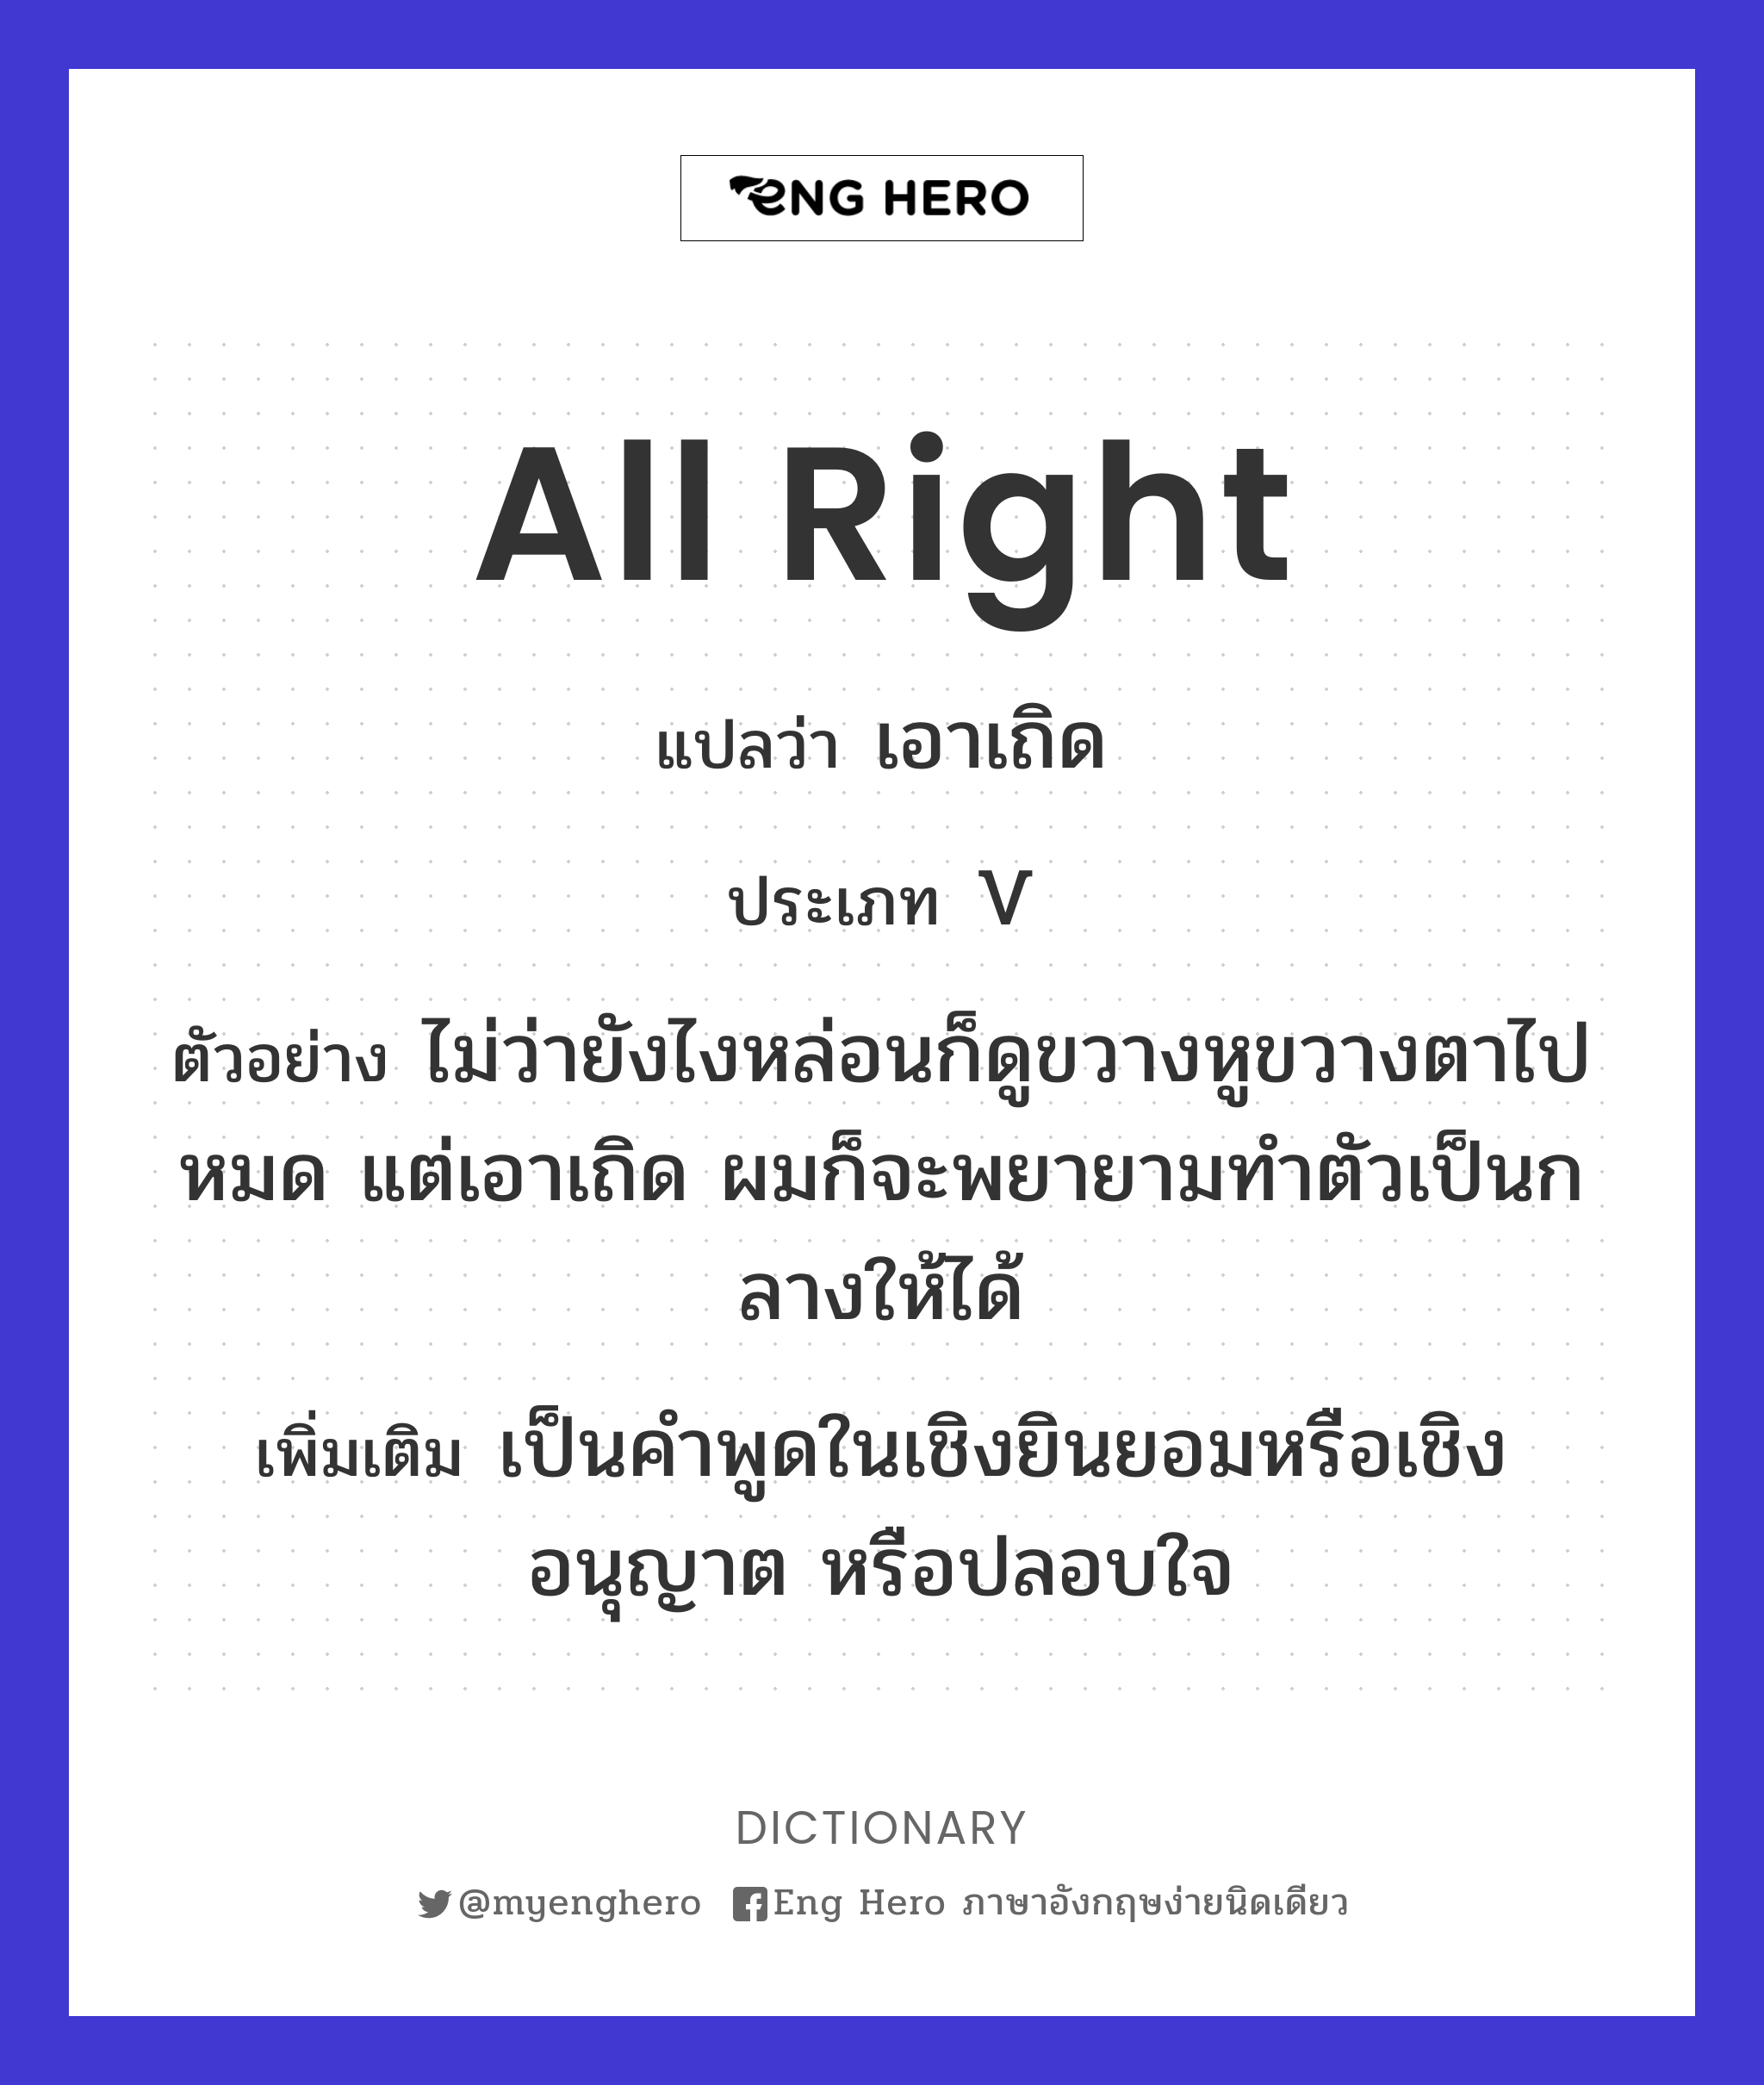 All right